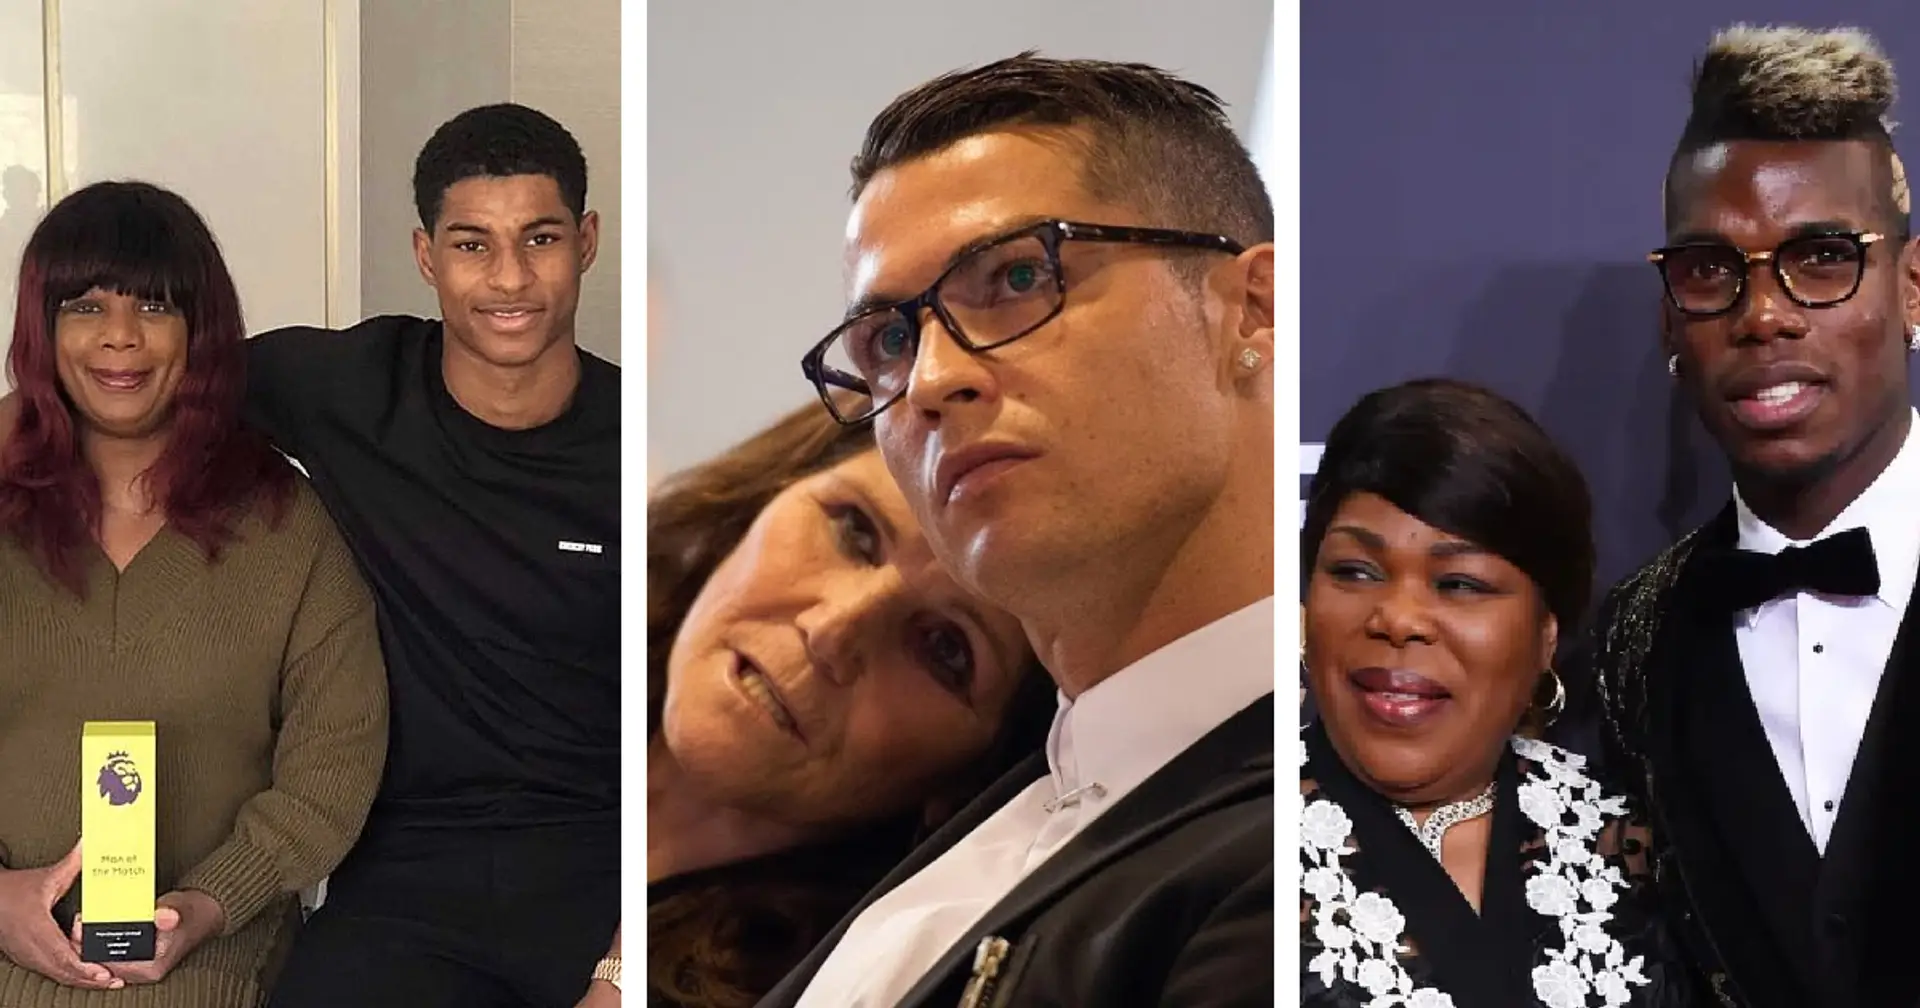 Mom knows best: 6 most caring supermoms who helped shape lives of famous footballers